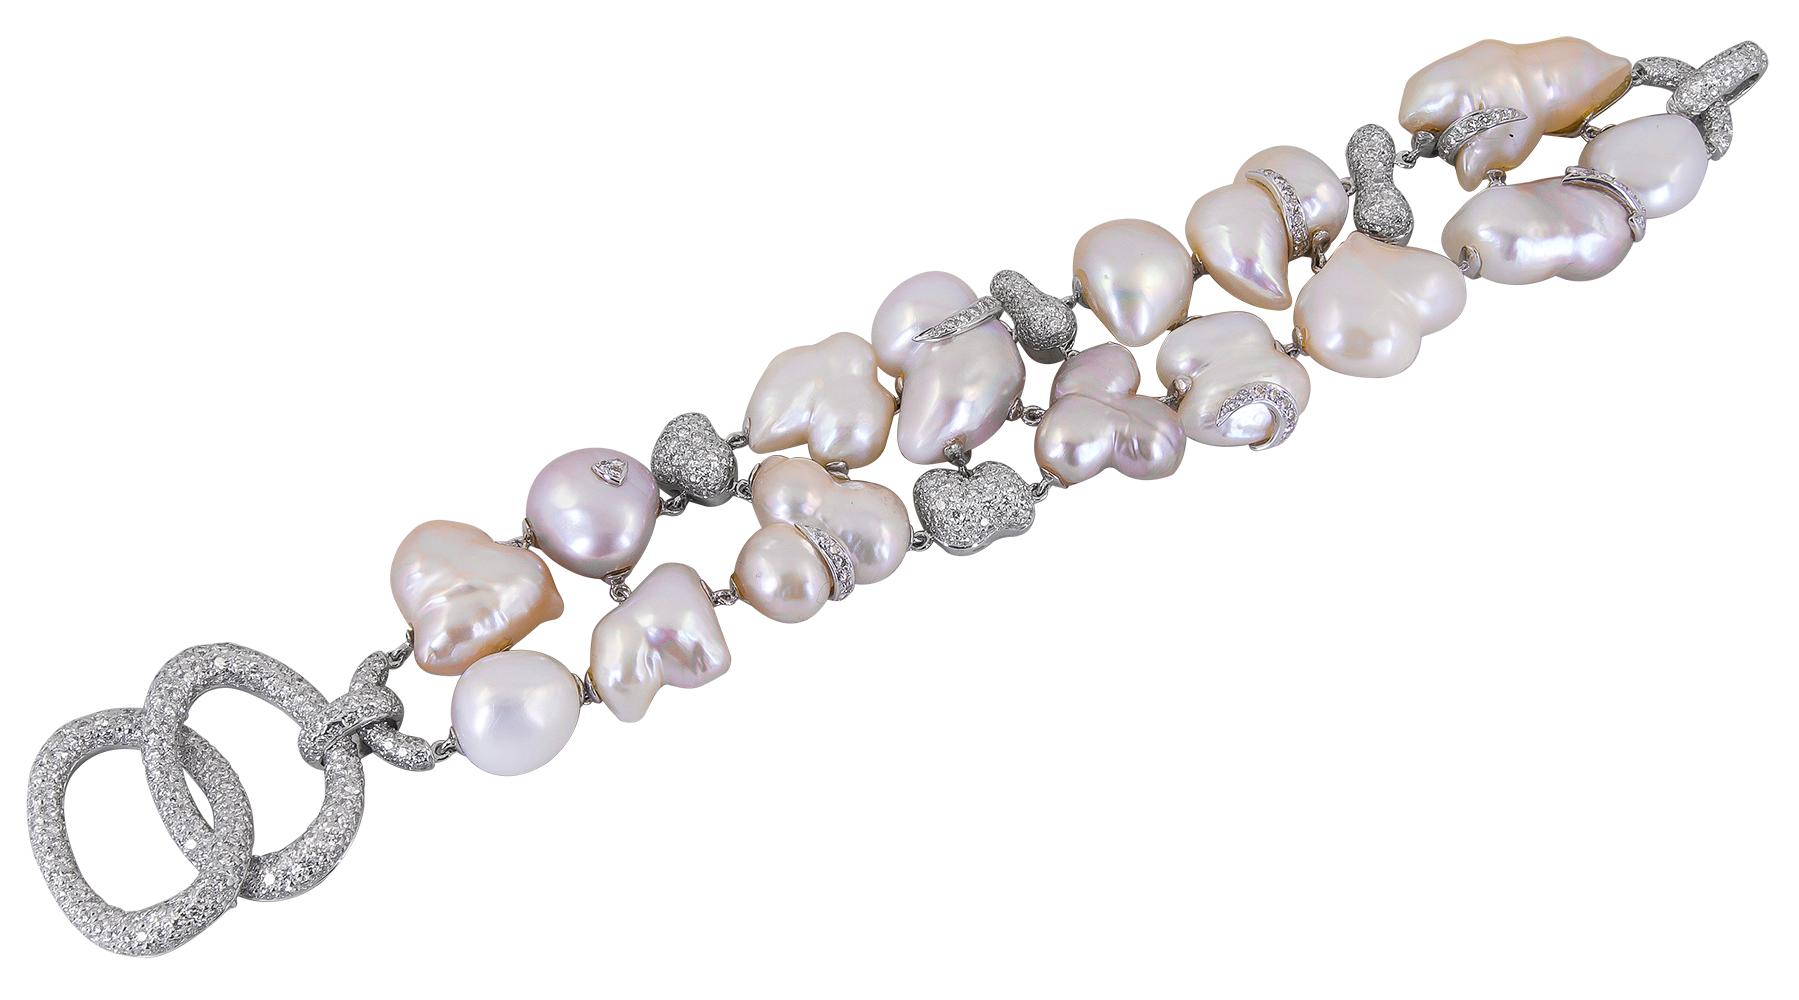 Sabbadini Diamond Pearl Bracelet Earrings Suite in 18k White Gold.

This Italian suite features baroque pearls that stagger organically-shaped baubles of diamond-pave. Fluidity in movement is the best way to describe both pieces when worn. The